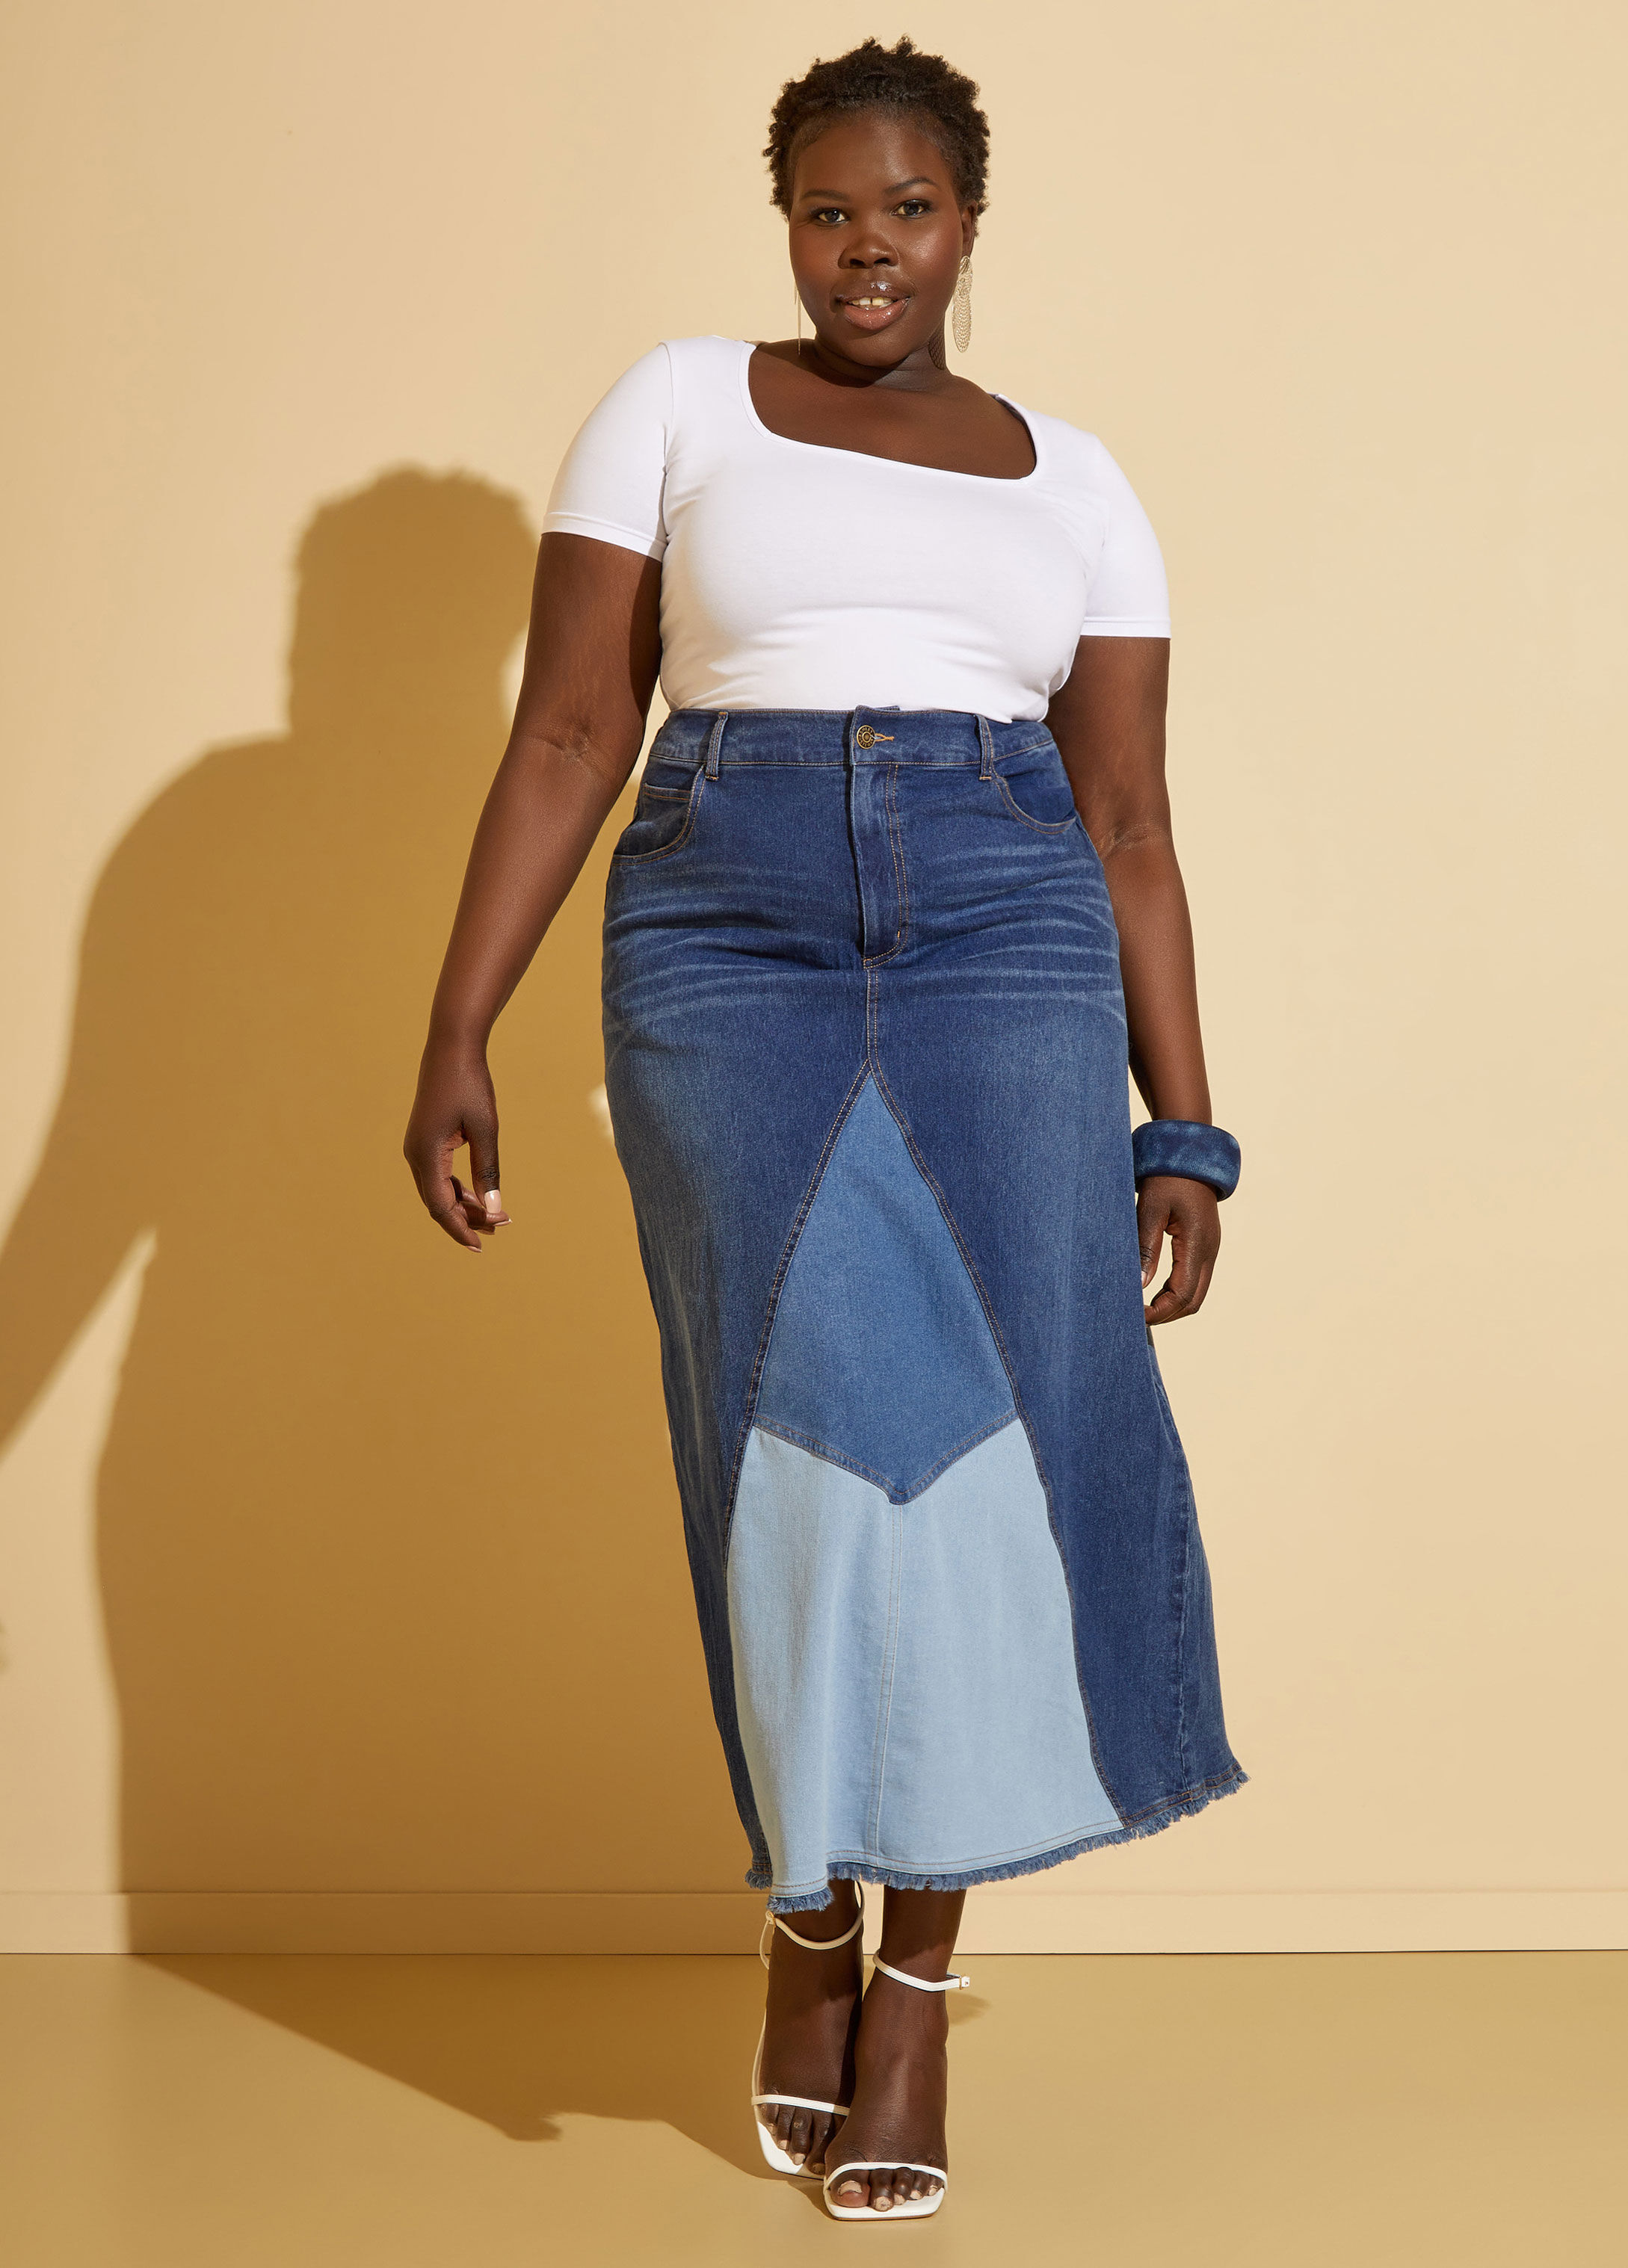 Buy Women's Plus Size High Rise Pencil Long Jeans Maxi Denim Skirt in Light  Blue Size 3XL at Amazon.in